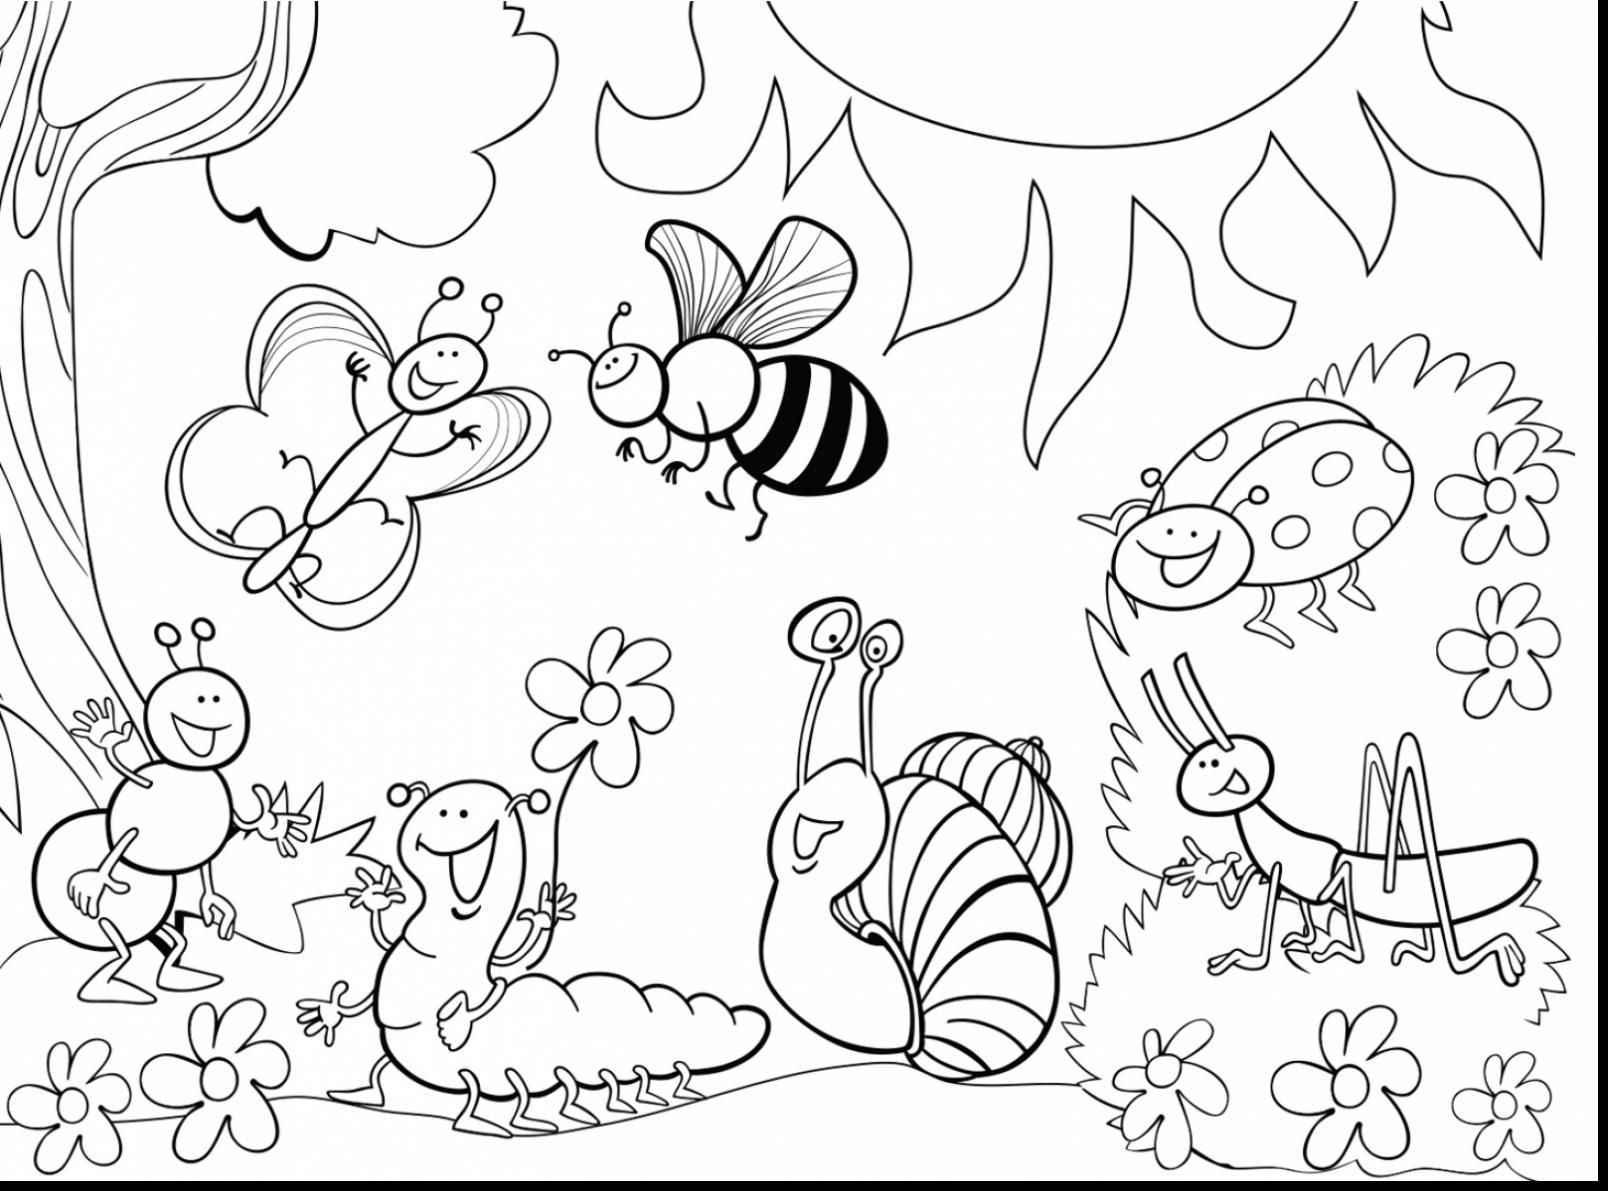 Bug Coloring Pages For Kids
 Bug Coloring Pages Bugs Print New